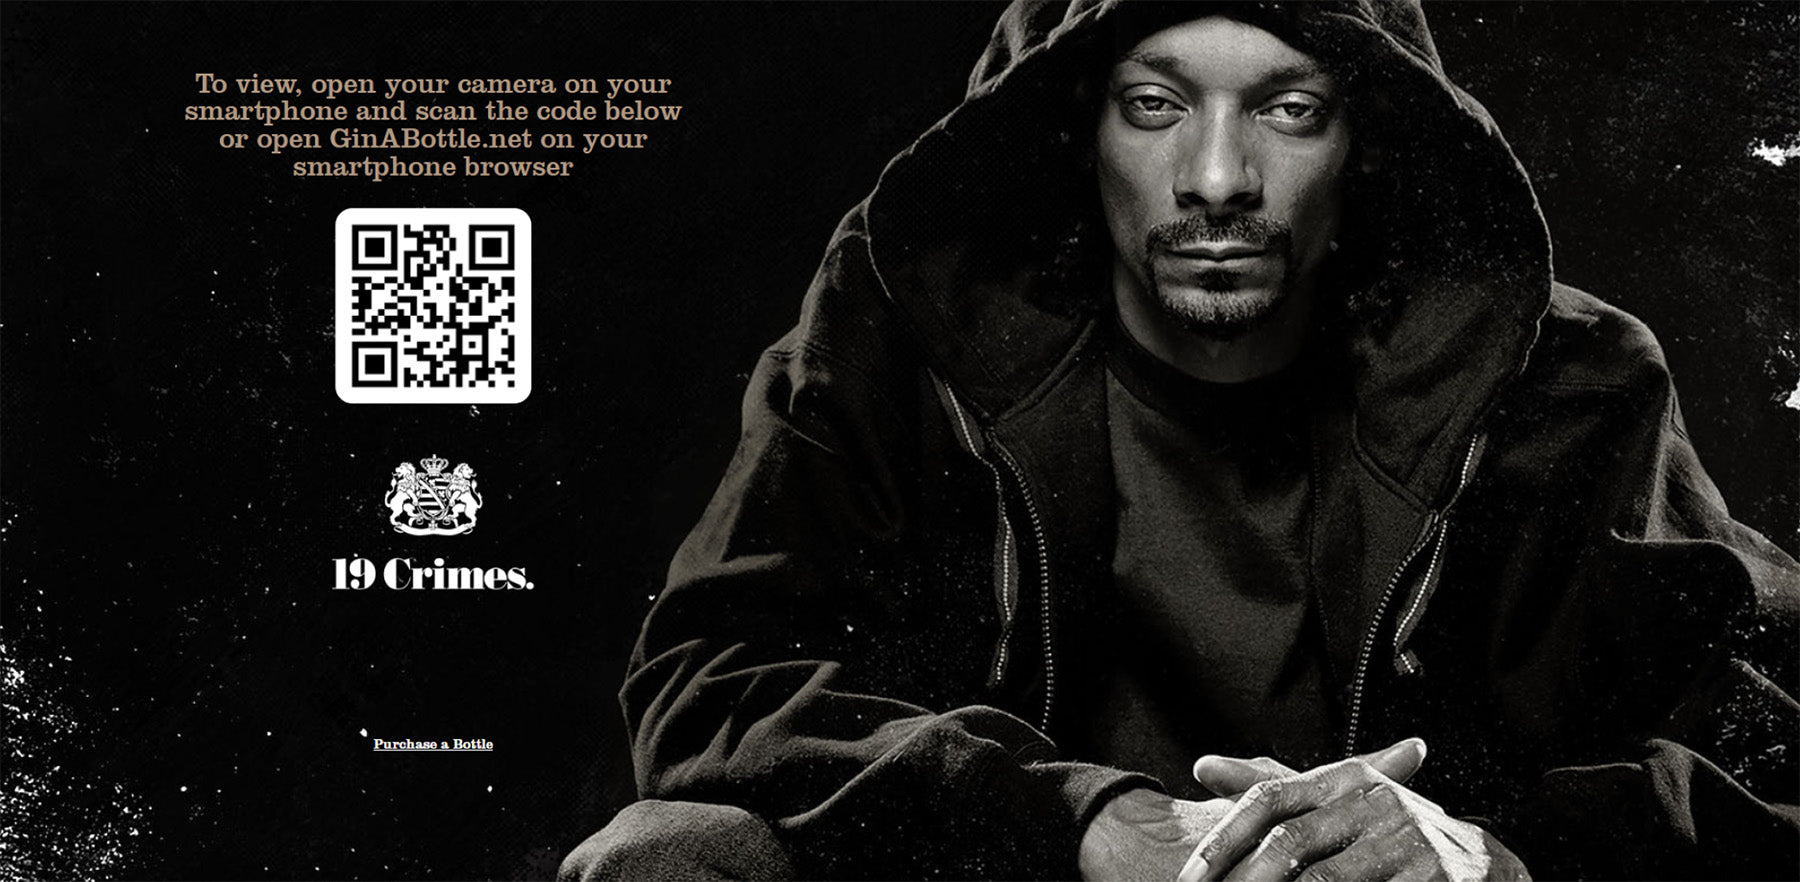 Snoop Dogg Cali Gold Augmented Reality experience QR code or go to ginabottle.net